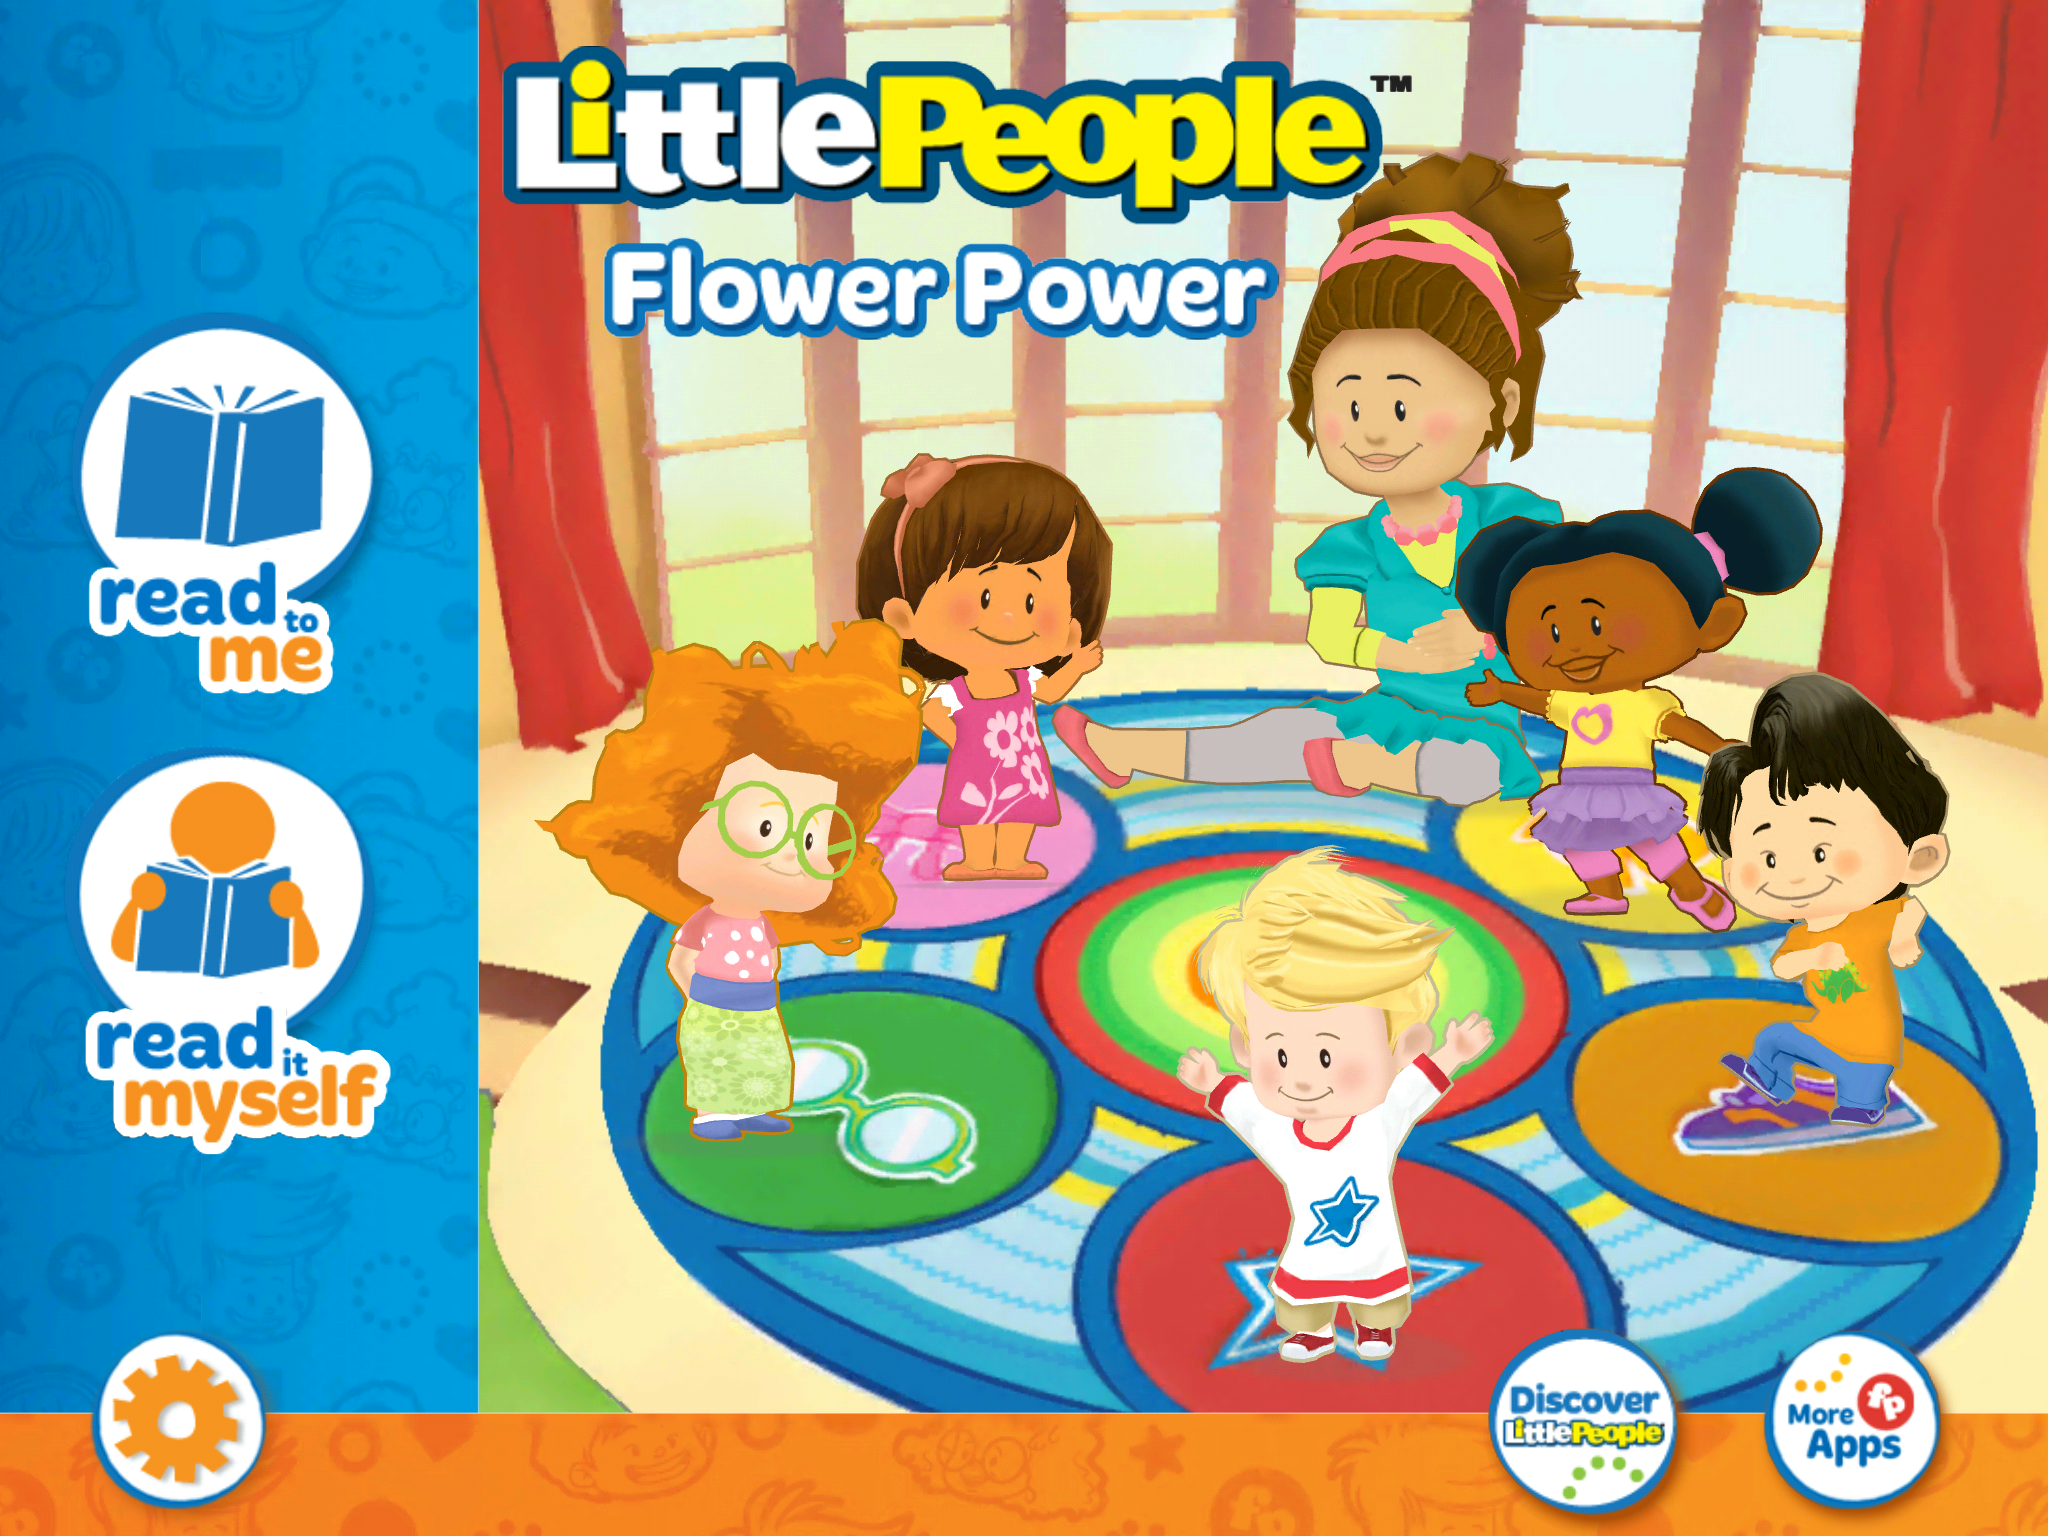 Little People Flower Power Interactive Storybook App Review